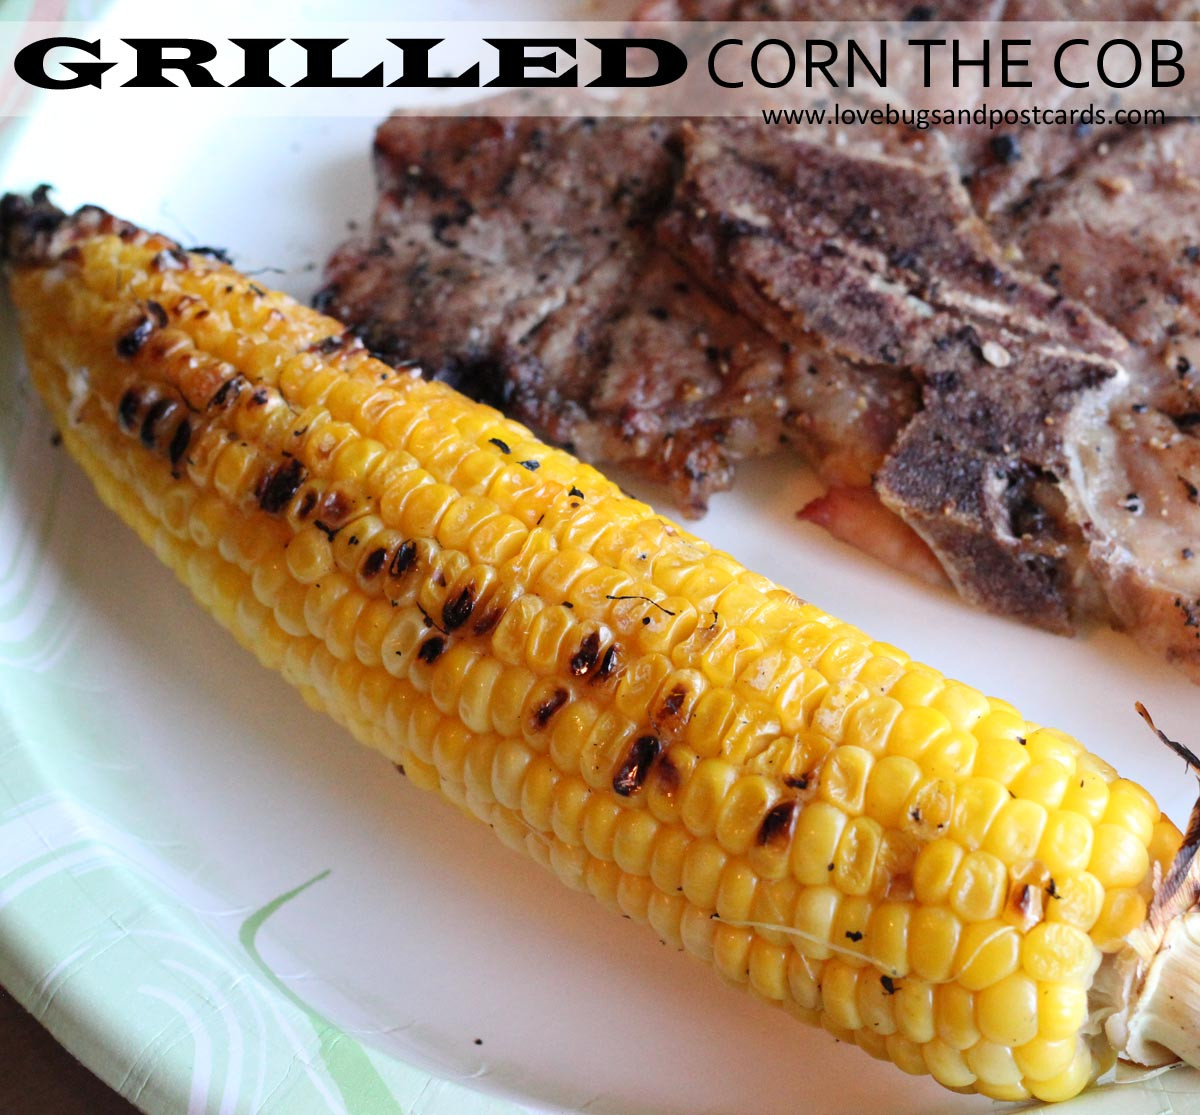 Corn On Cob On Grill
 Grilled Corn on the Cob Lovebugs and Postcards